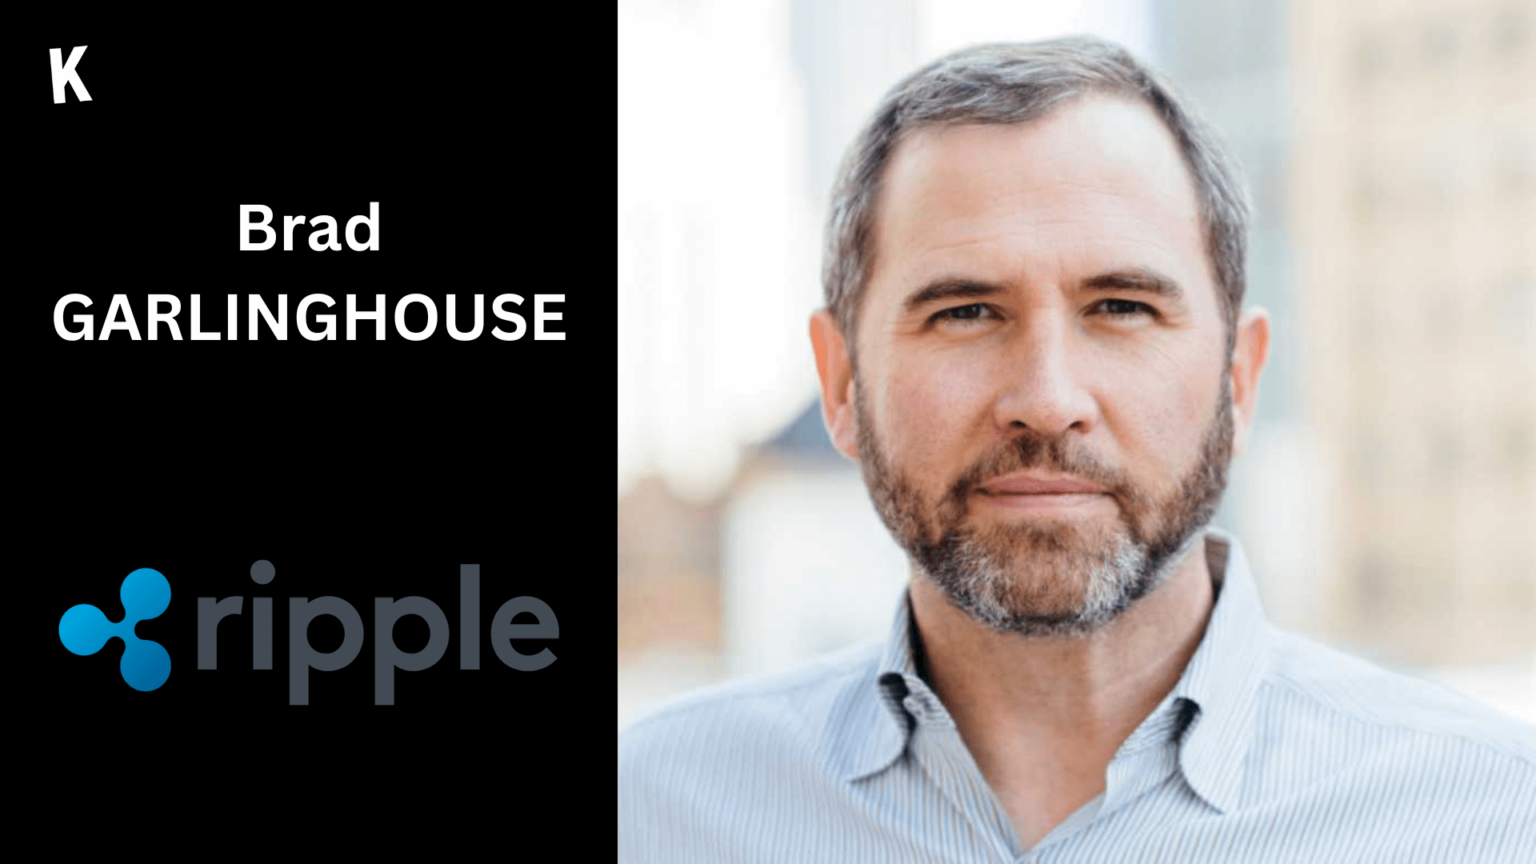 garlinghouse-explains-why-it-is-easier-for-ripple-to-repeg-its-stablecoin-to-$1-than-usdc